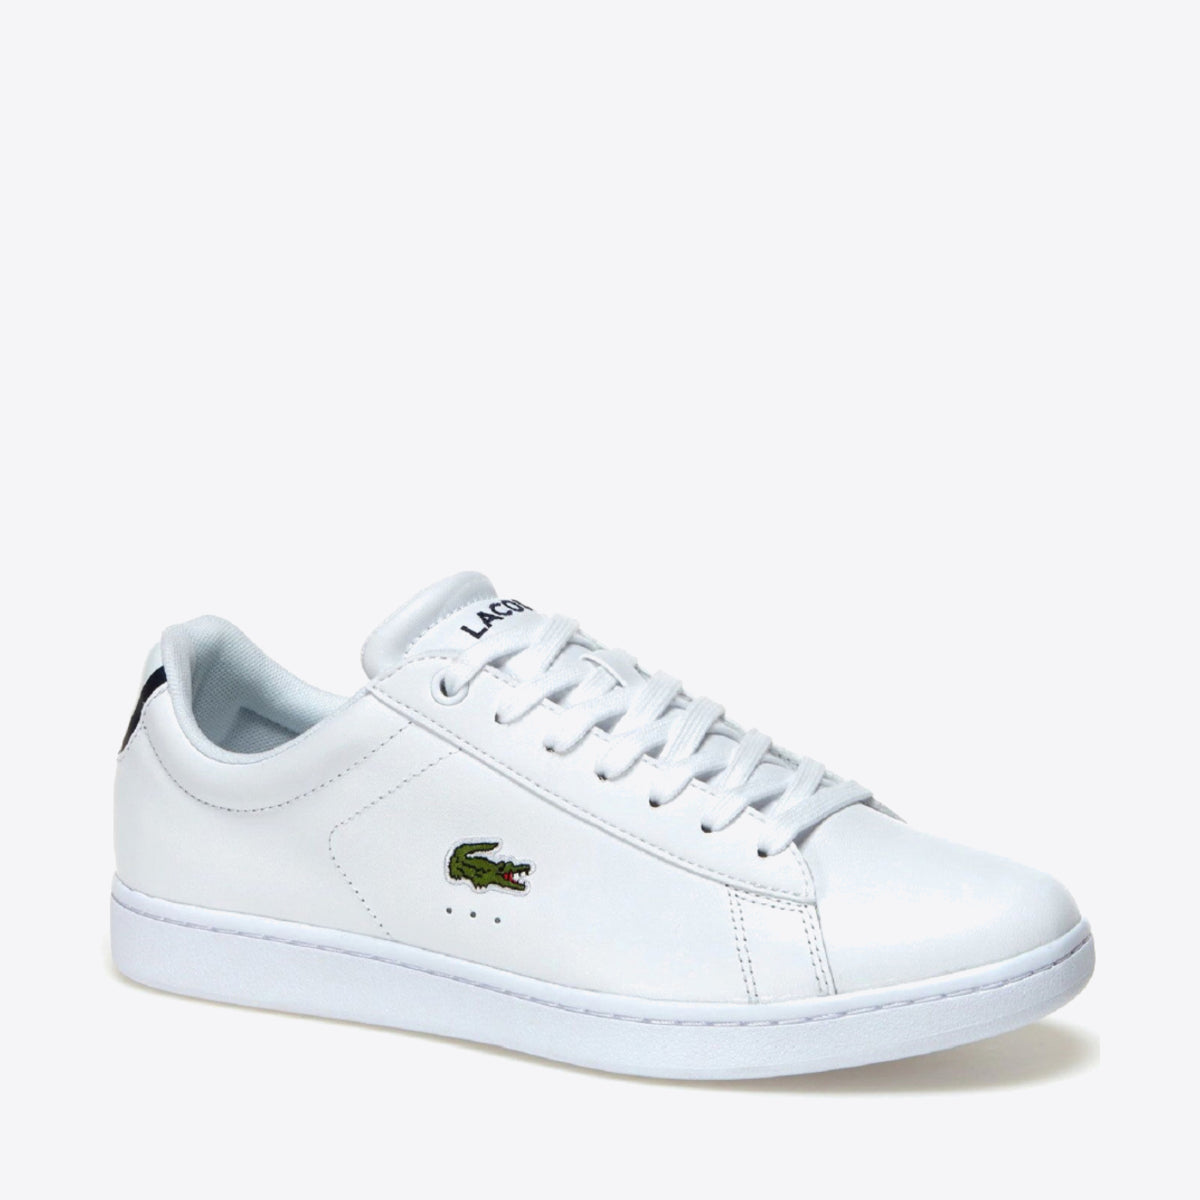 LACOSTE Carnaby Evo Trainer White - Image 3